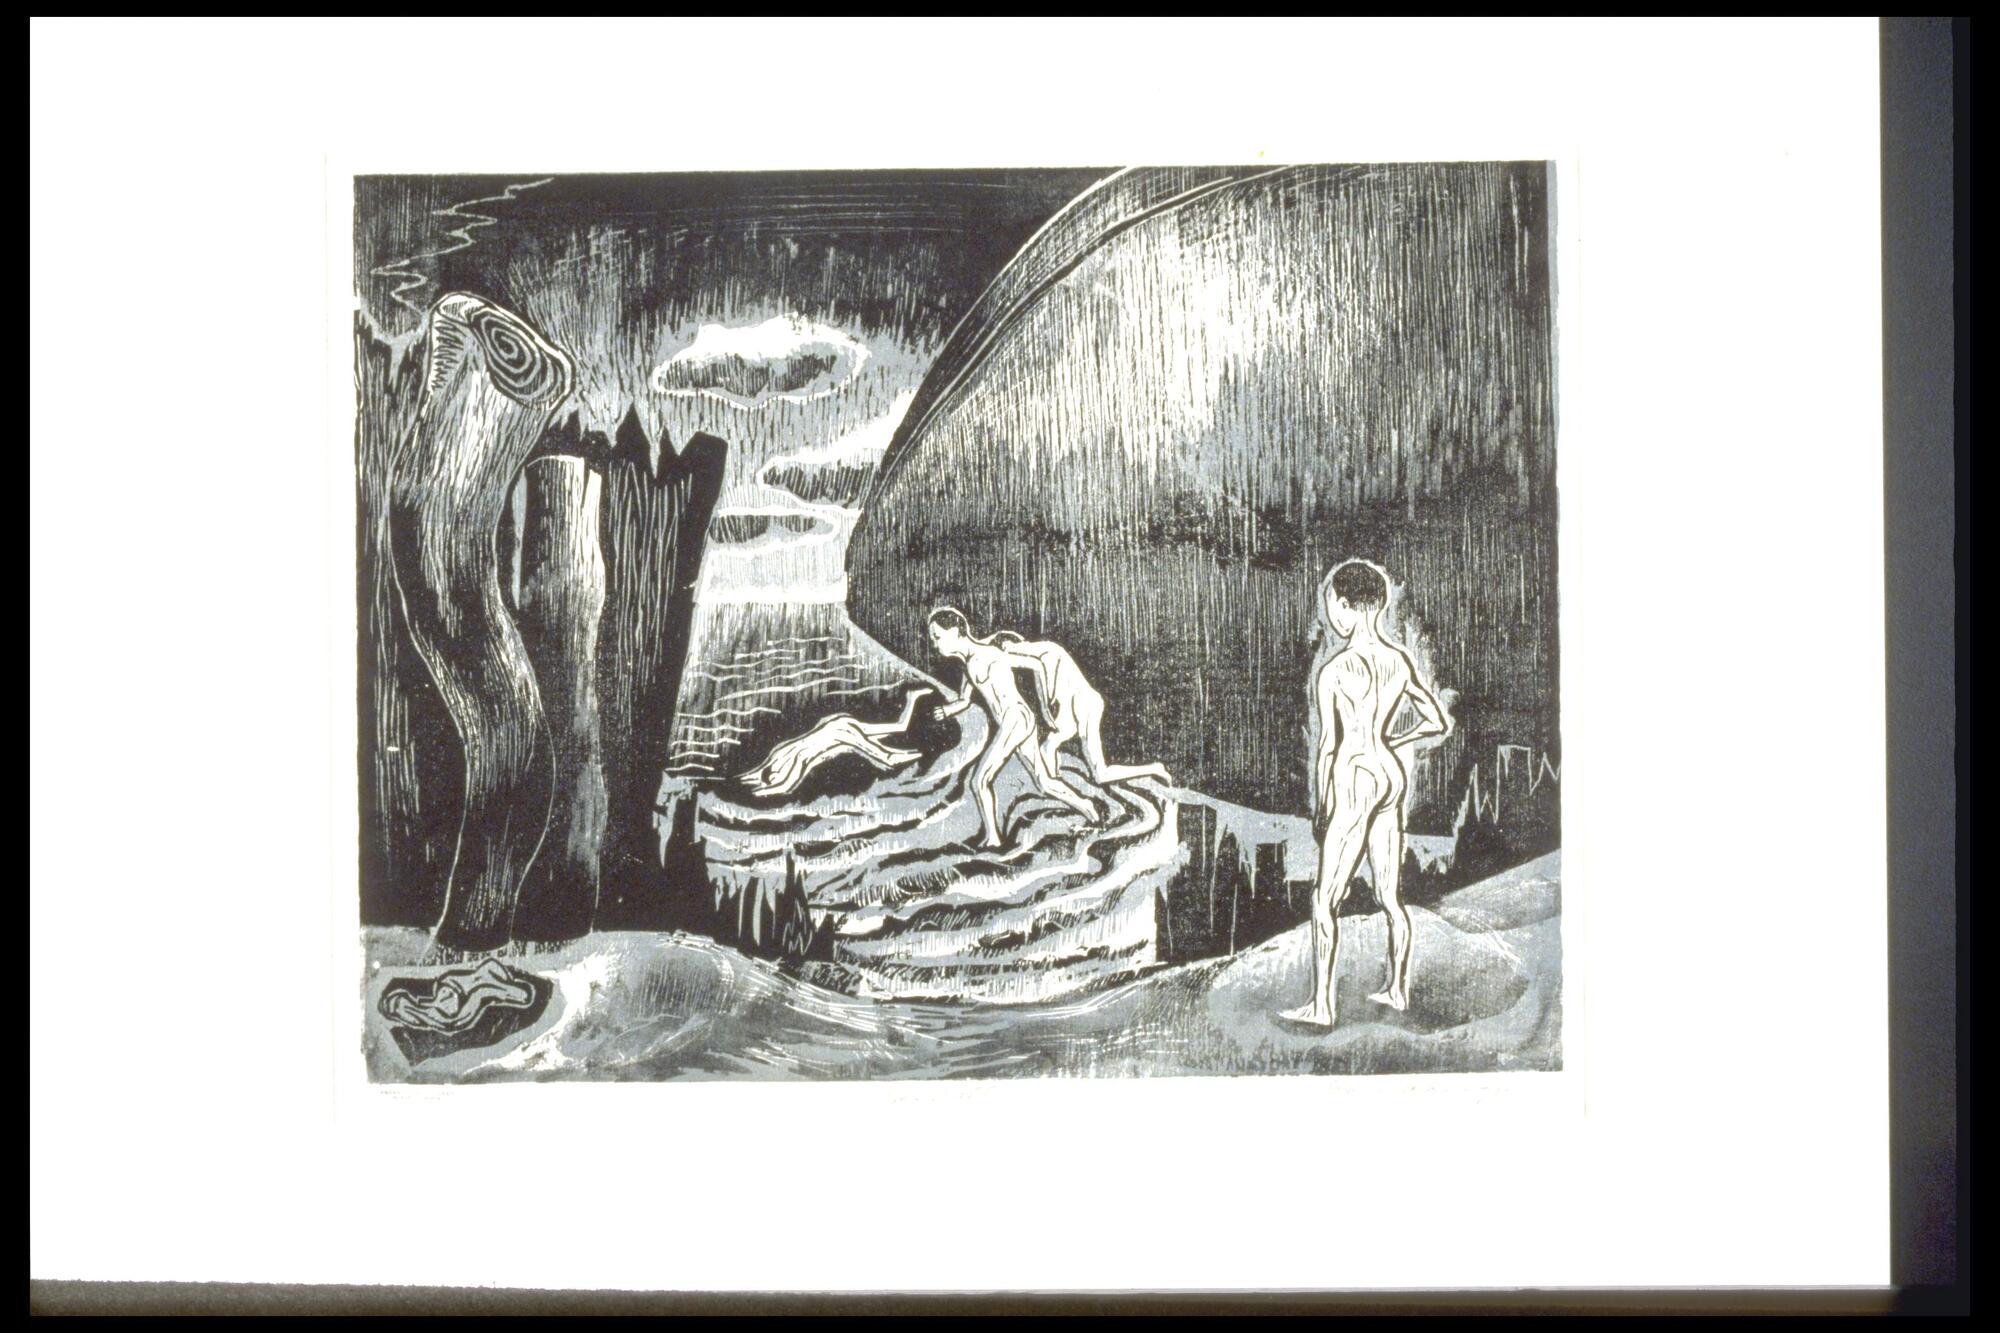 Three nude figures stand, and one figure swims in a body of water. &nbsp;A large wall is on the right side of the print, and a small fire burns on the left.